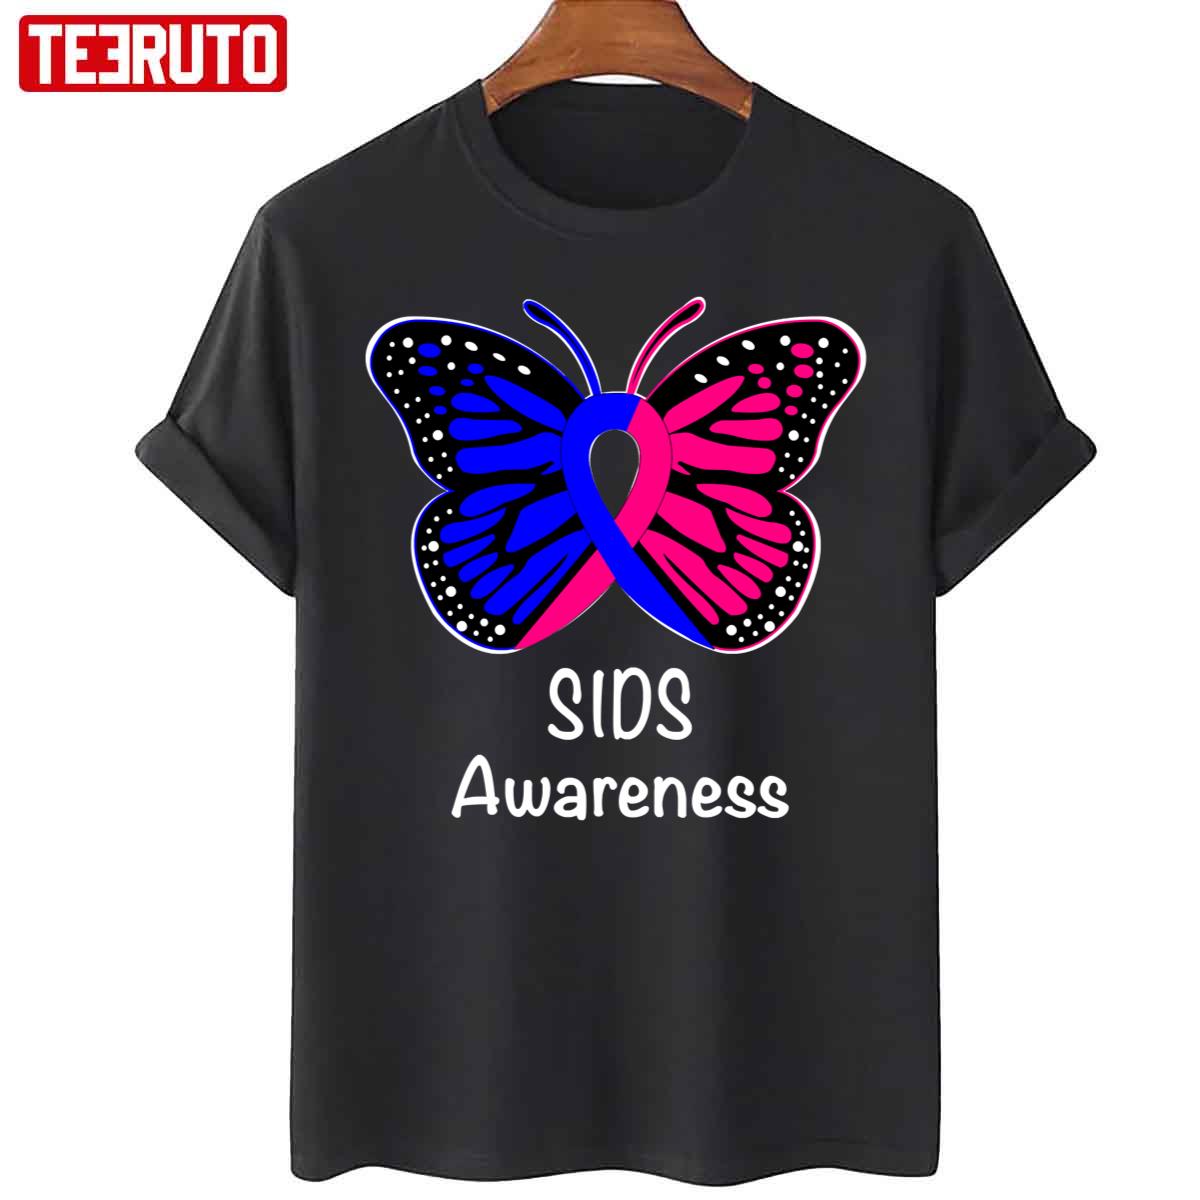 Sids Awareness Warrior Support Sudden Infant Death Syndrome Butterly Unisex T-Shirt